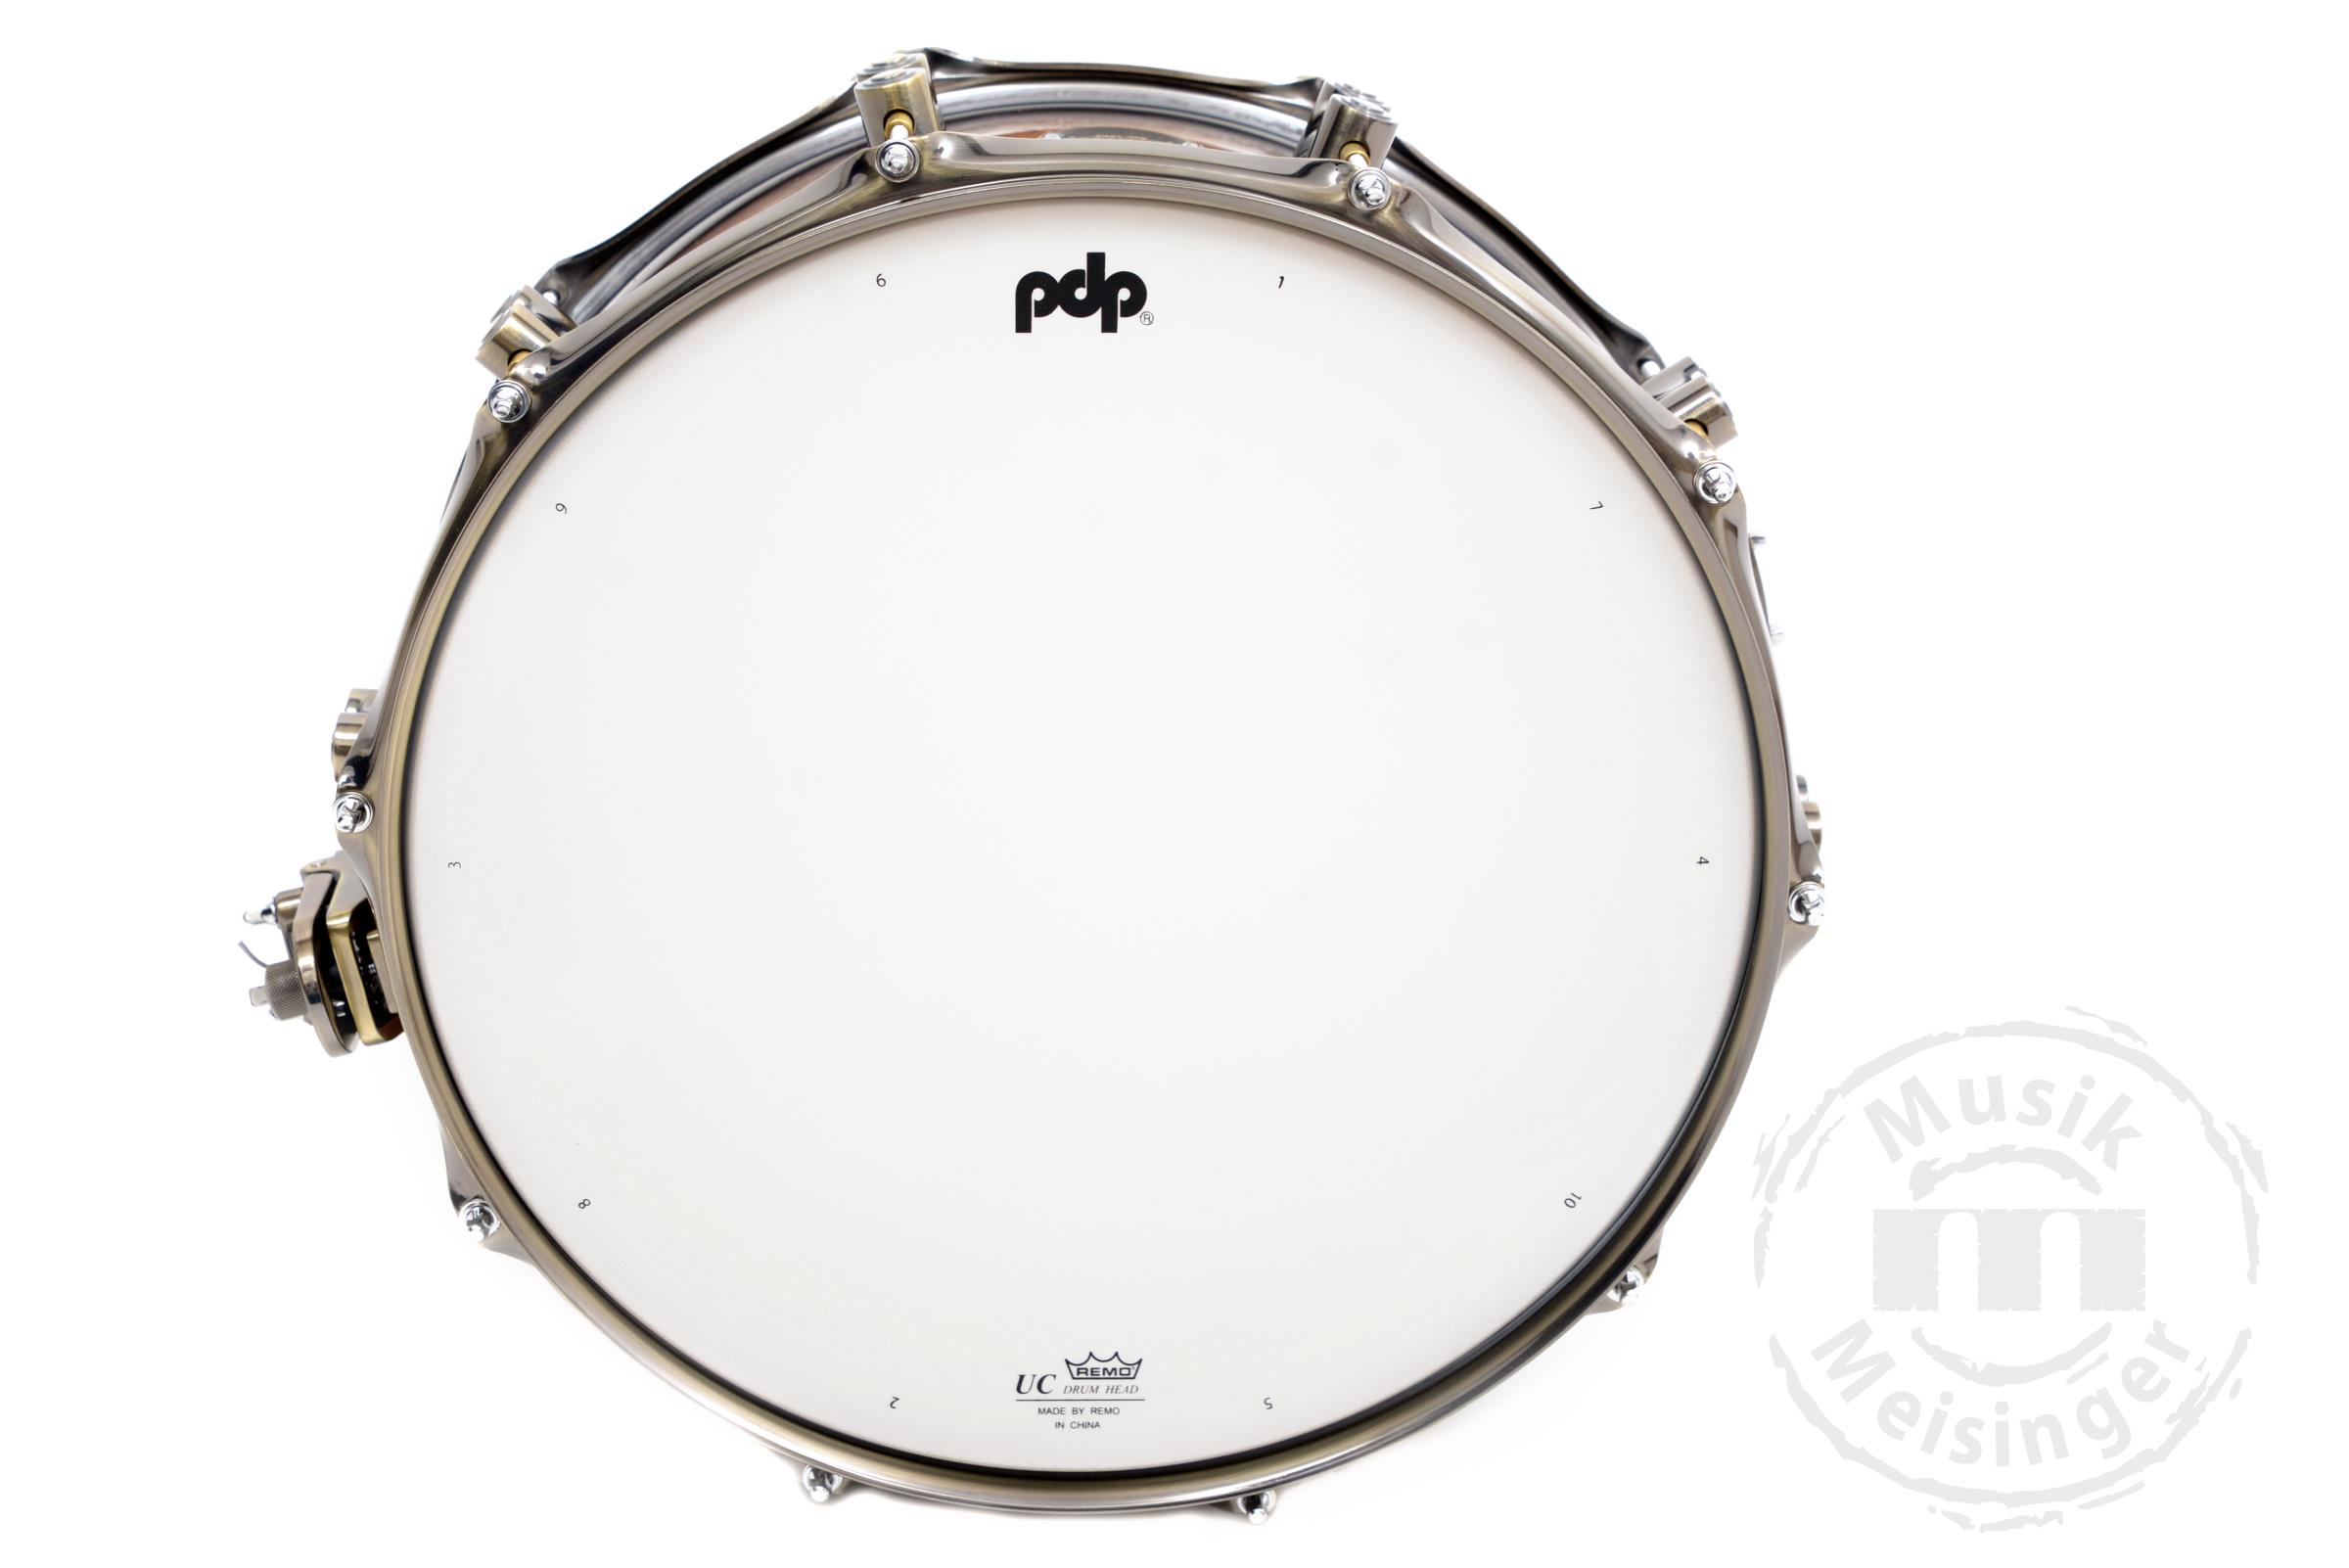 PDP Concept Maple Ltd. Edition 14x5,5 Snare